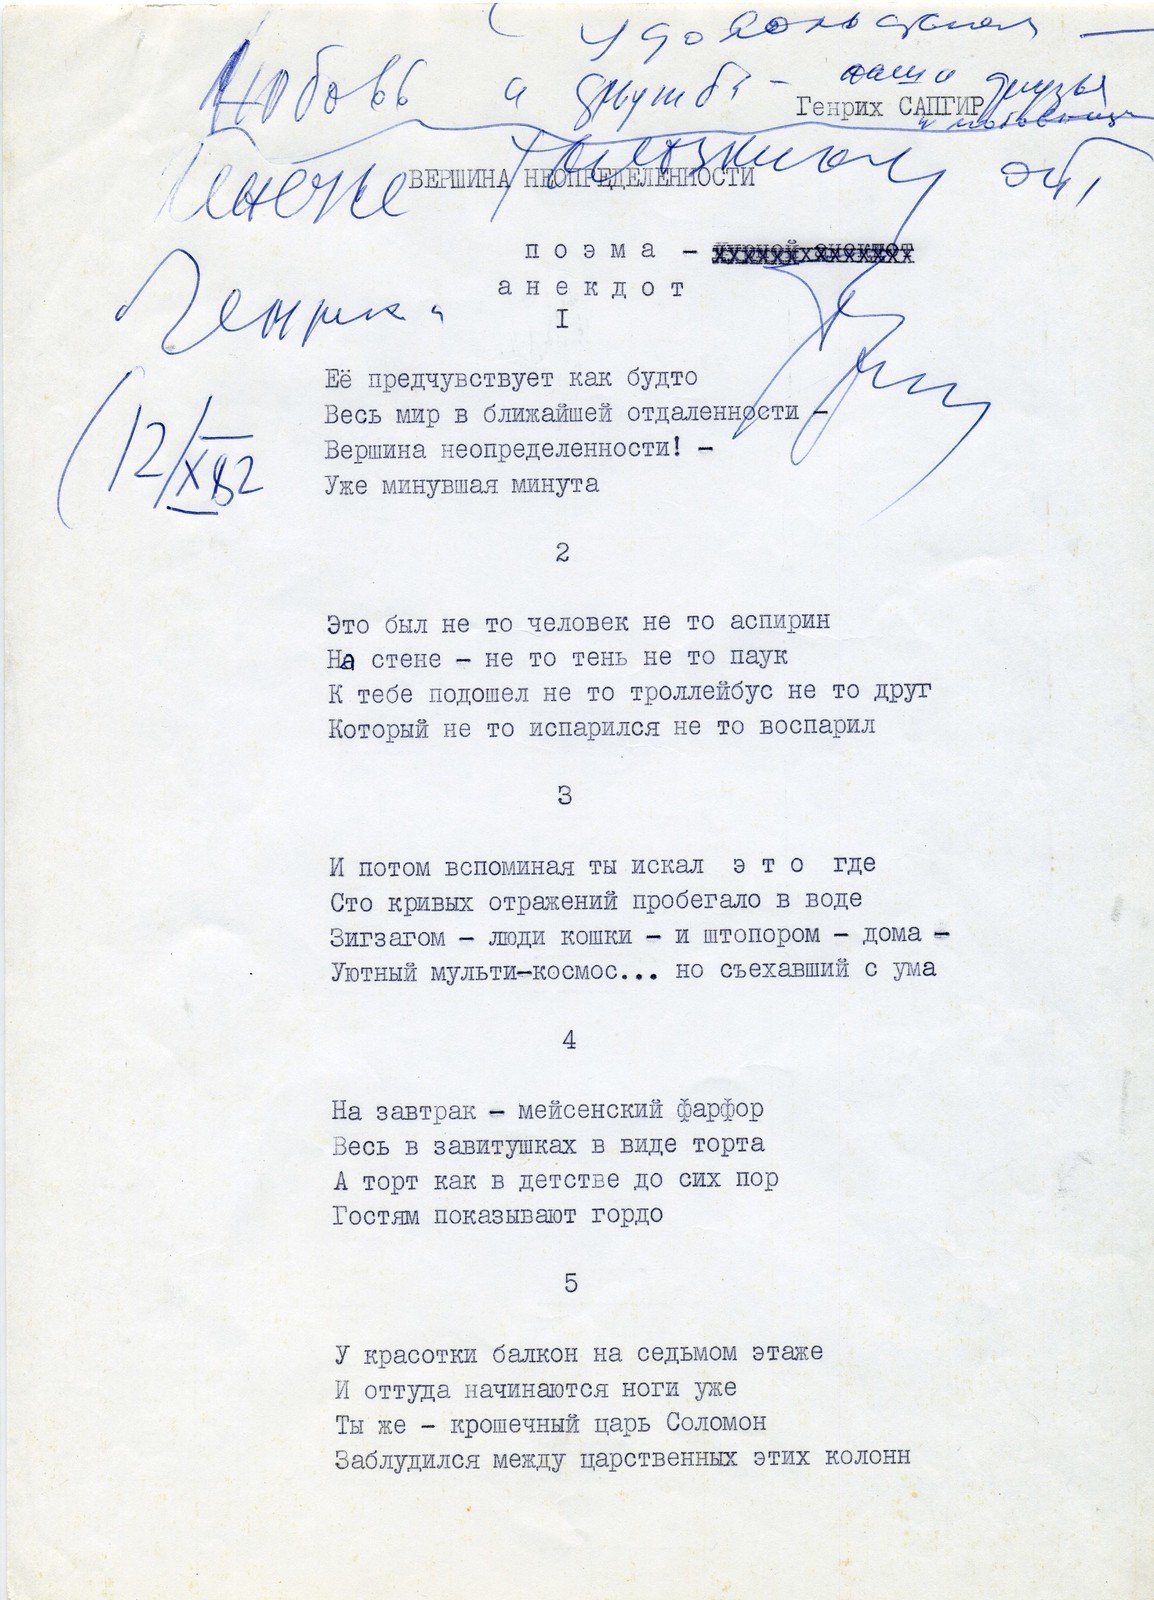 Typewritten text of The Peak of Indeterminacy by Genrikh Sapgir, signed. 1981Leonid Talochkin CollectionGarage Archive Collection, Moscow